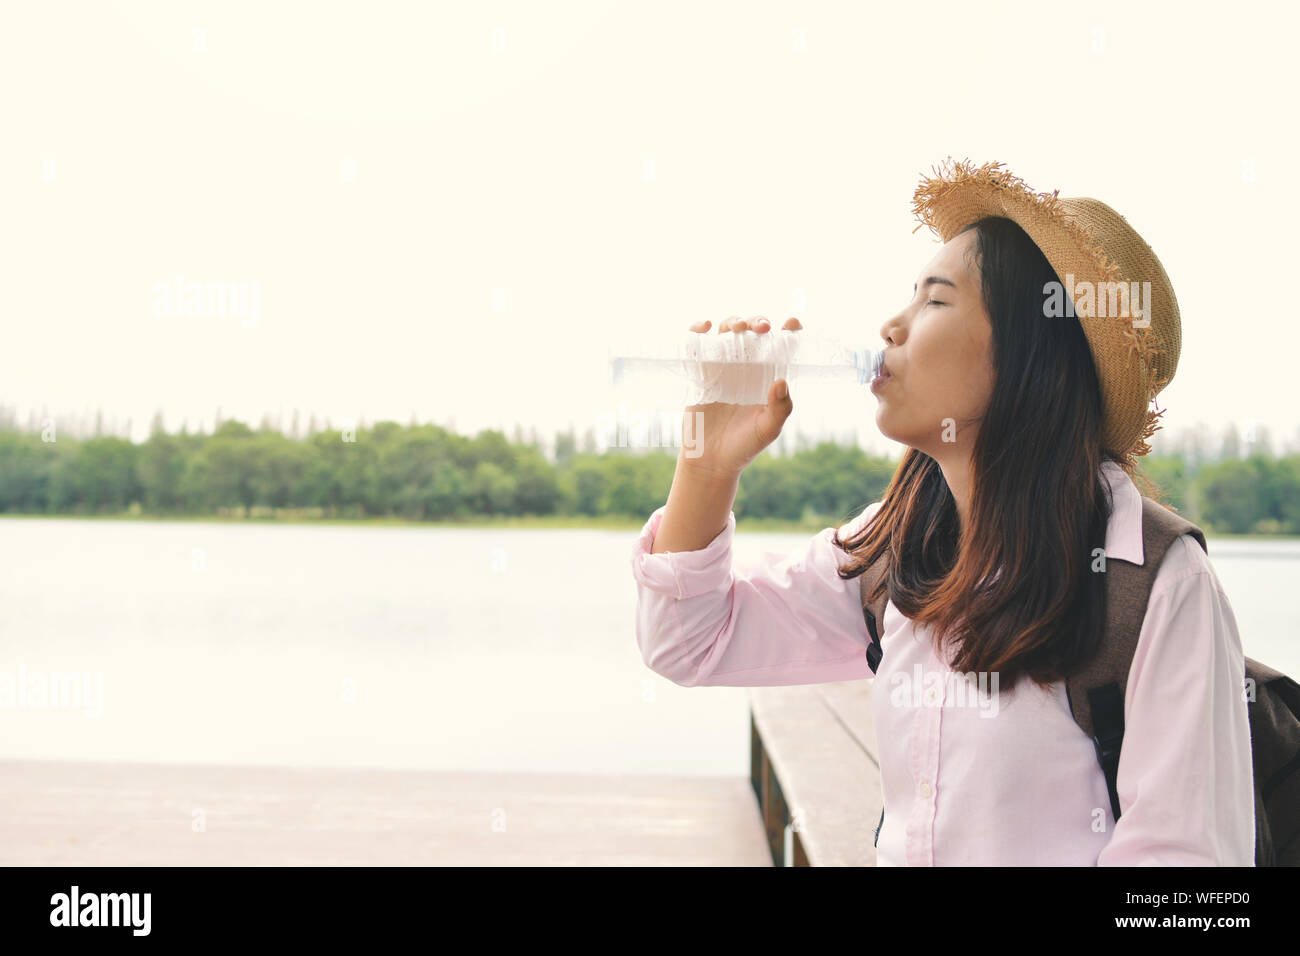 Thirsty Young Woman Drinking Water At Lakeshore Against Clear Sky Stock Photo